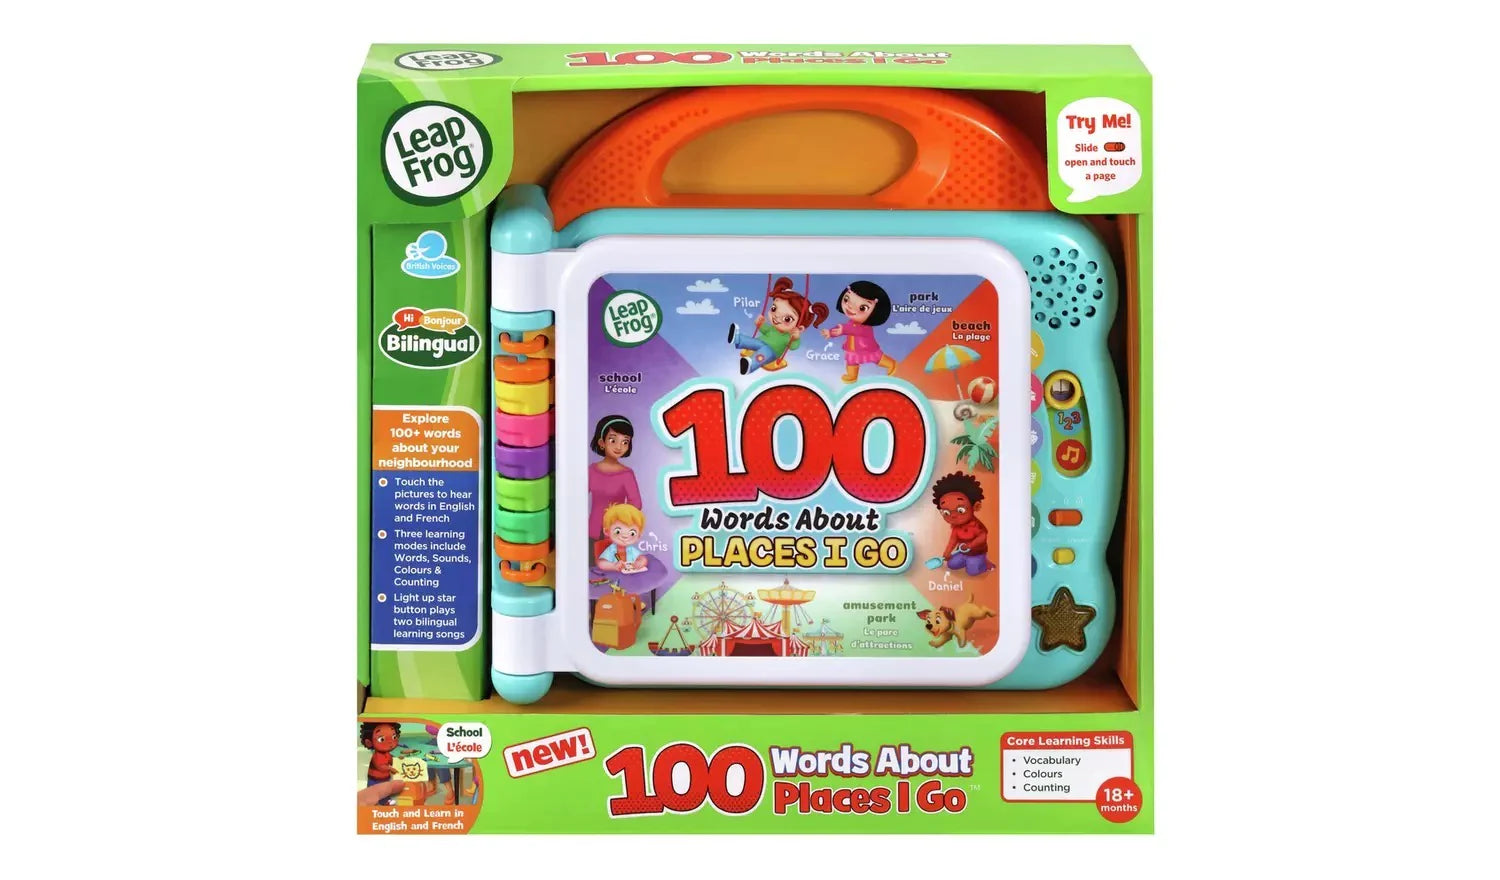 LEAP FROG 100 WORDS BOOK - PLACES I GO ENGLISH / FRENCH